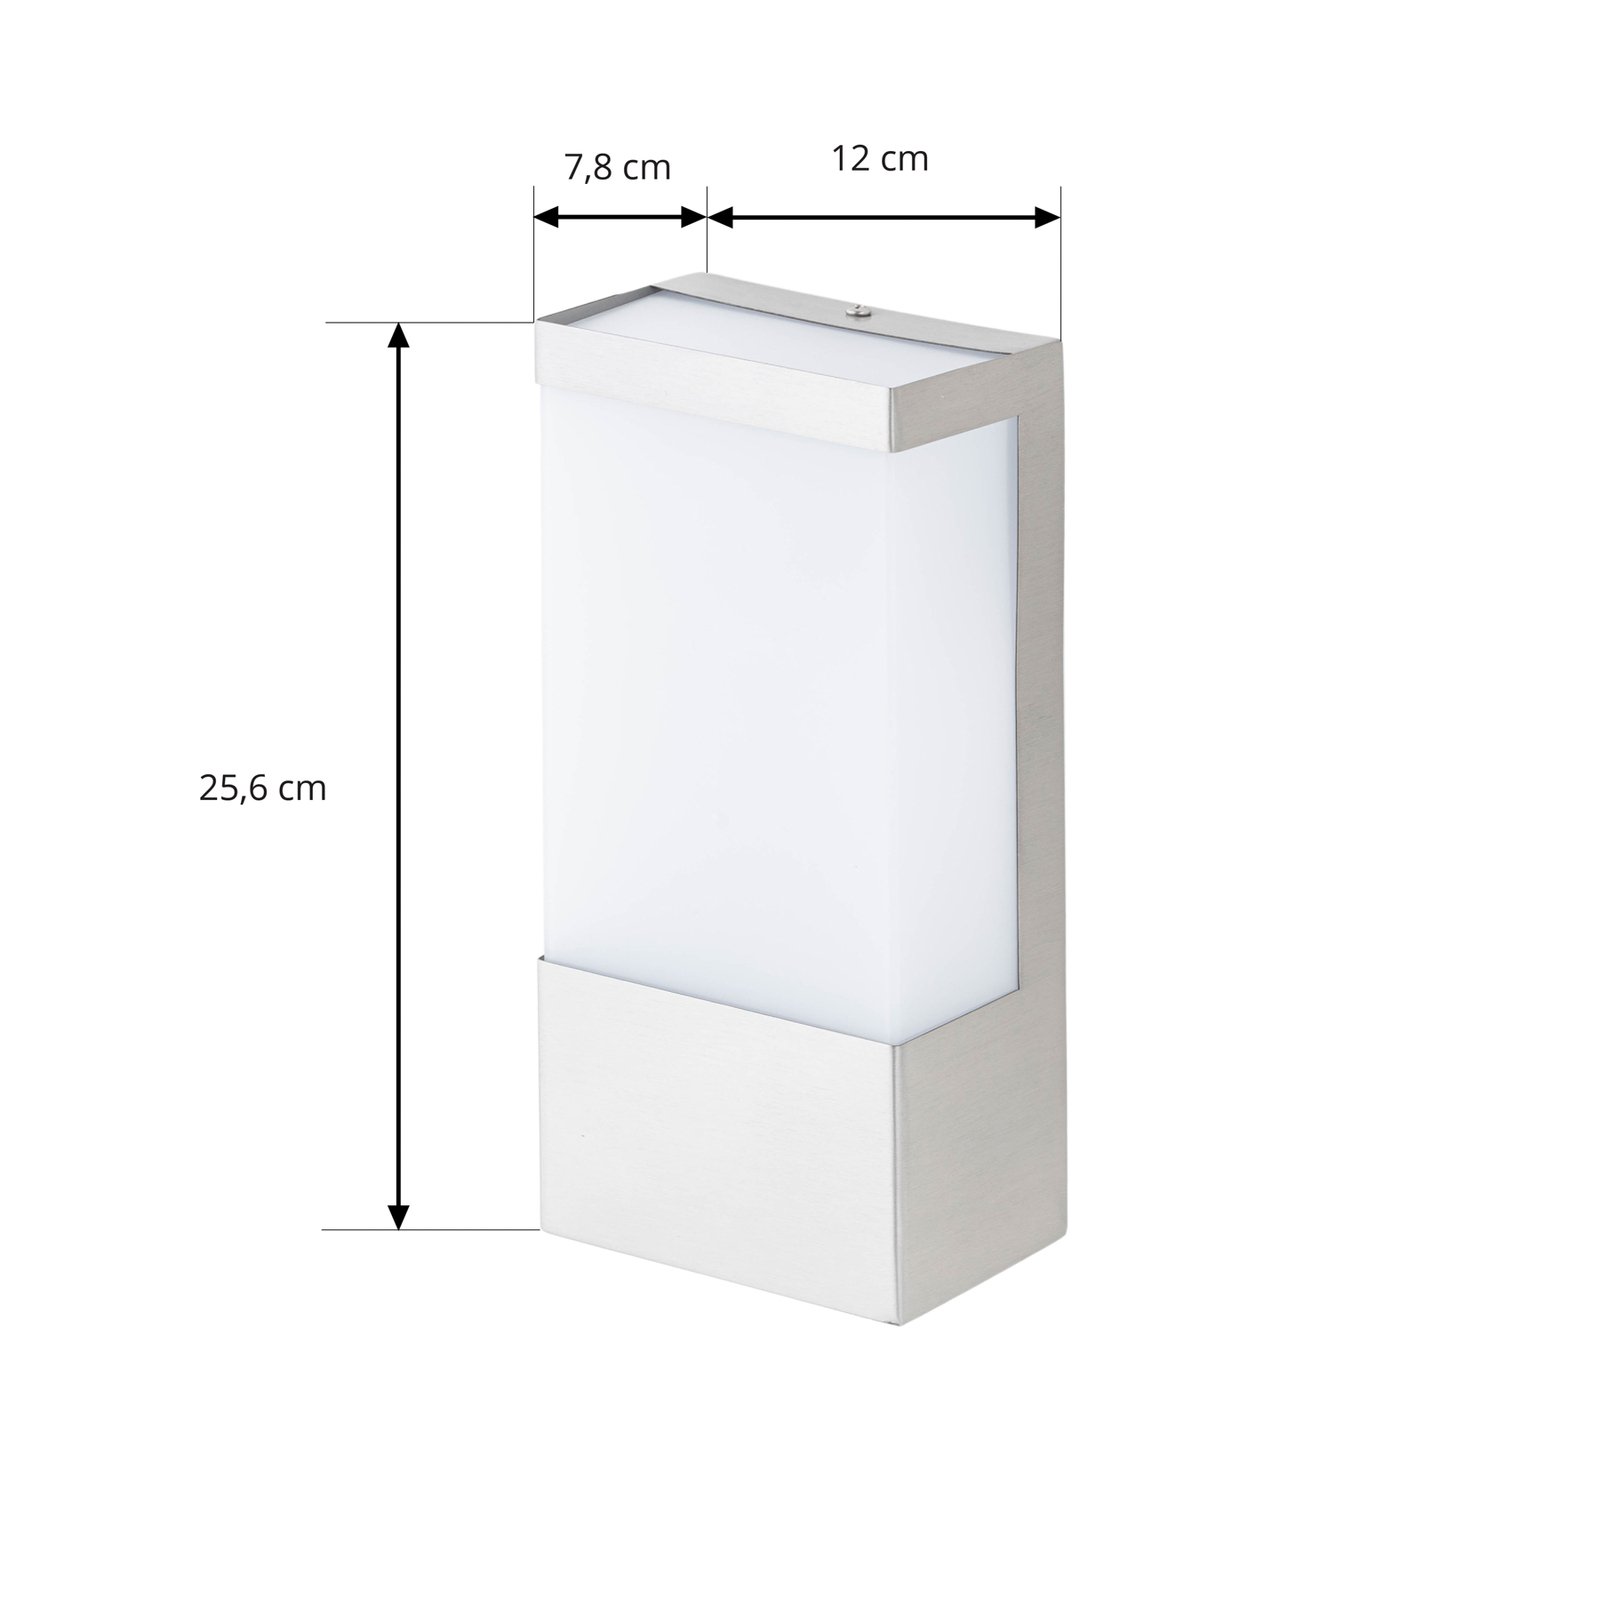 Square stainless steel outdoor wall light Kirana